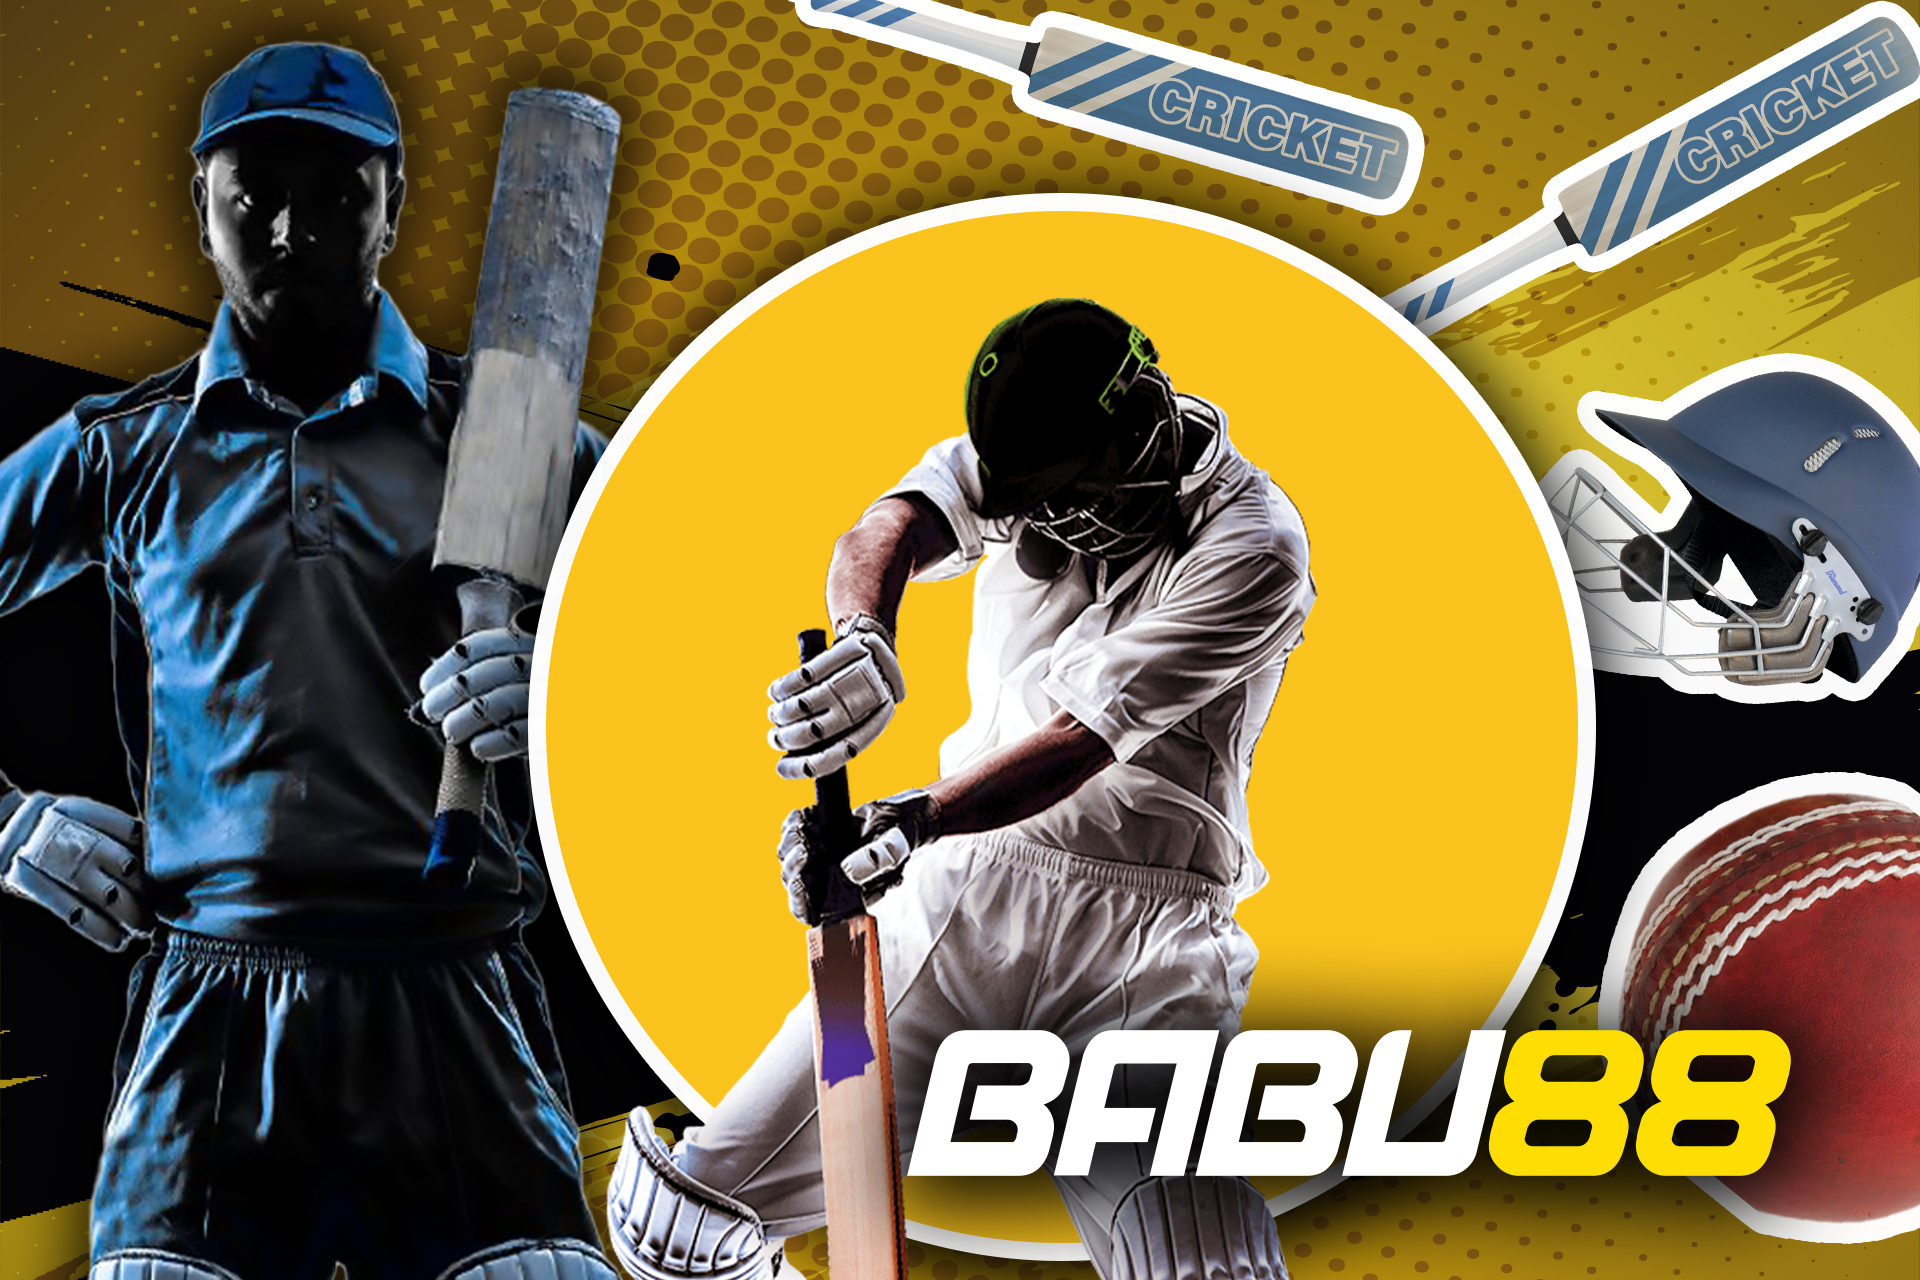 You will find lots of different cricket tournametns to bet on in the Babu88 sportsbook.